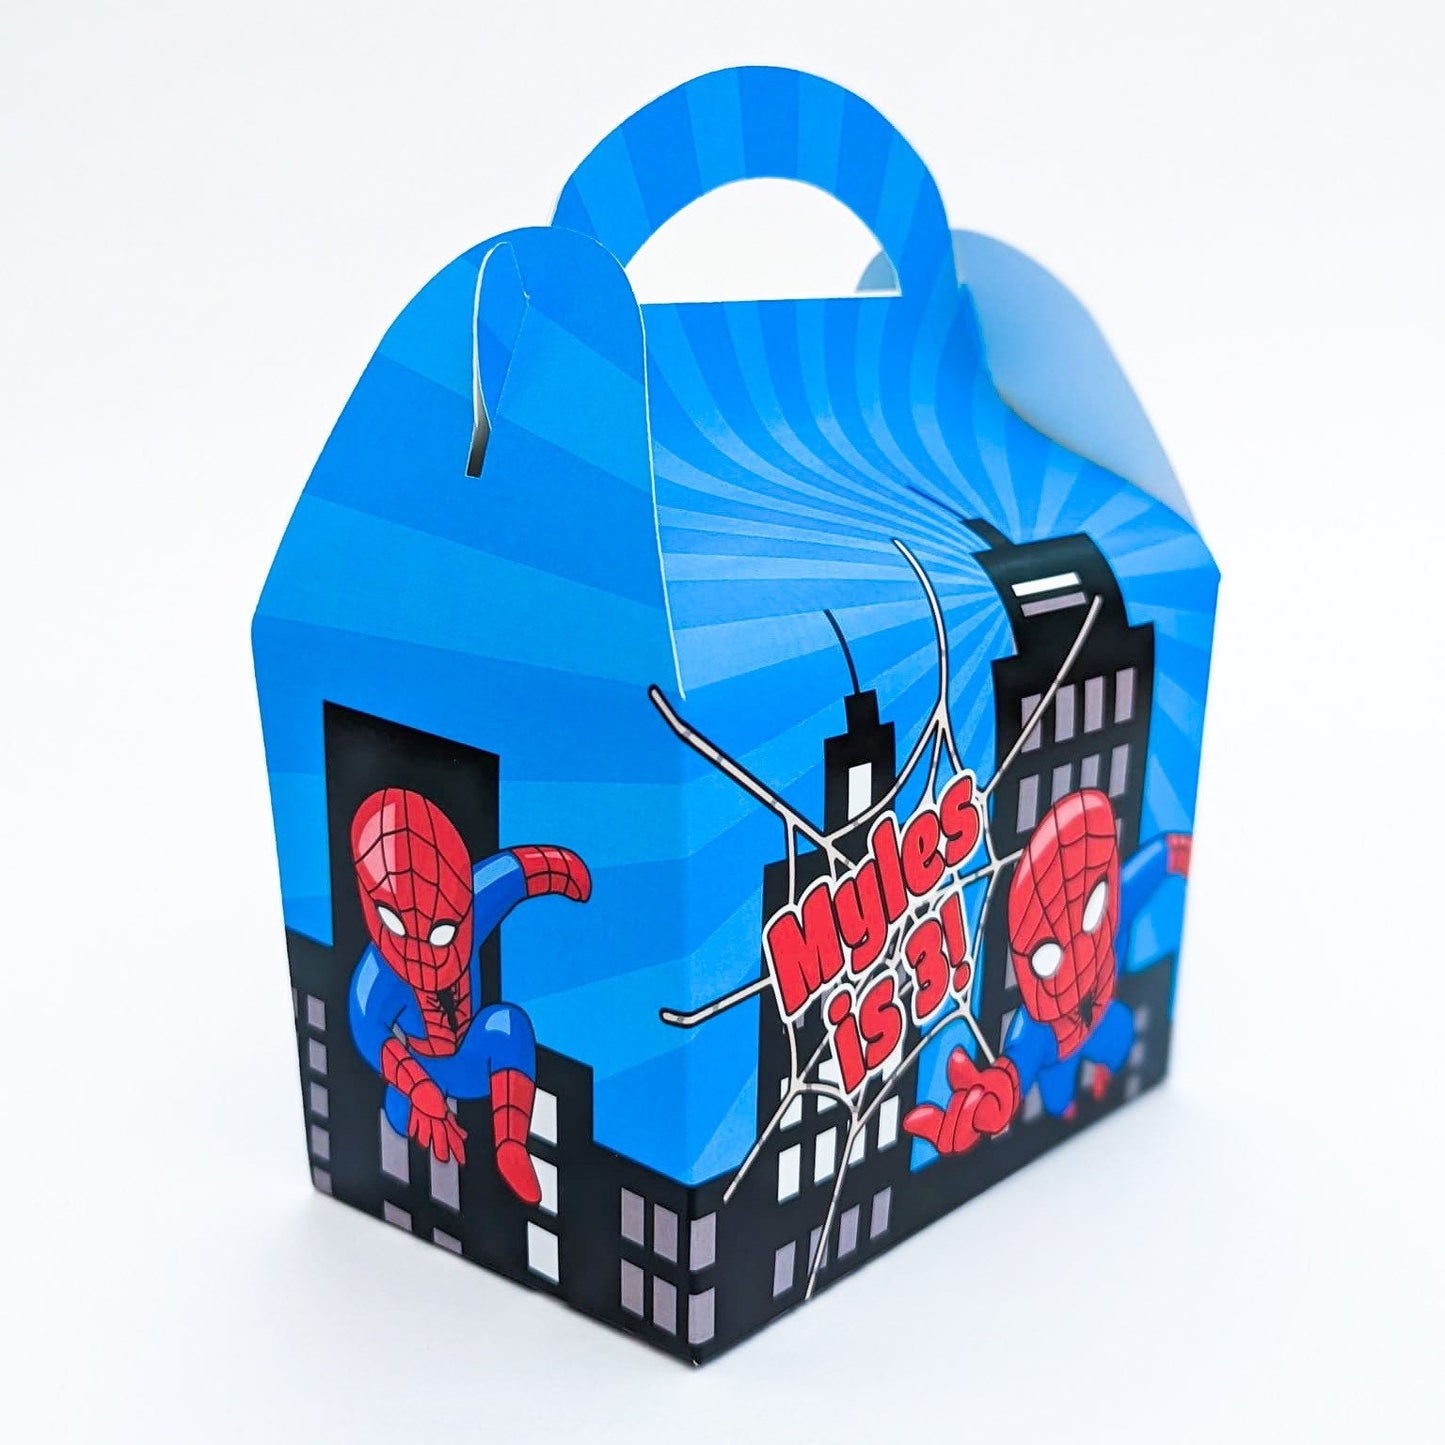 Spider-Man spiderman spider man superhero cute boys Personalised Children’s Party Box Gift Bag Favour